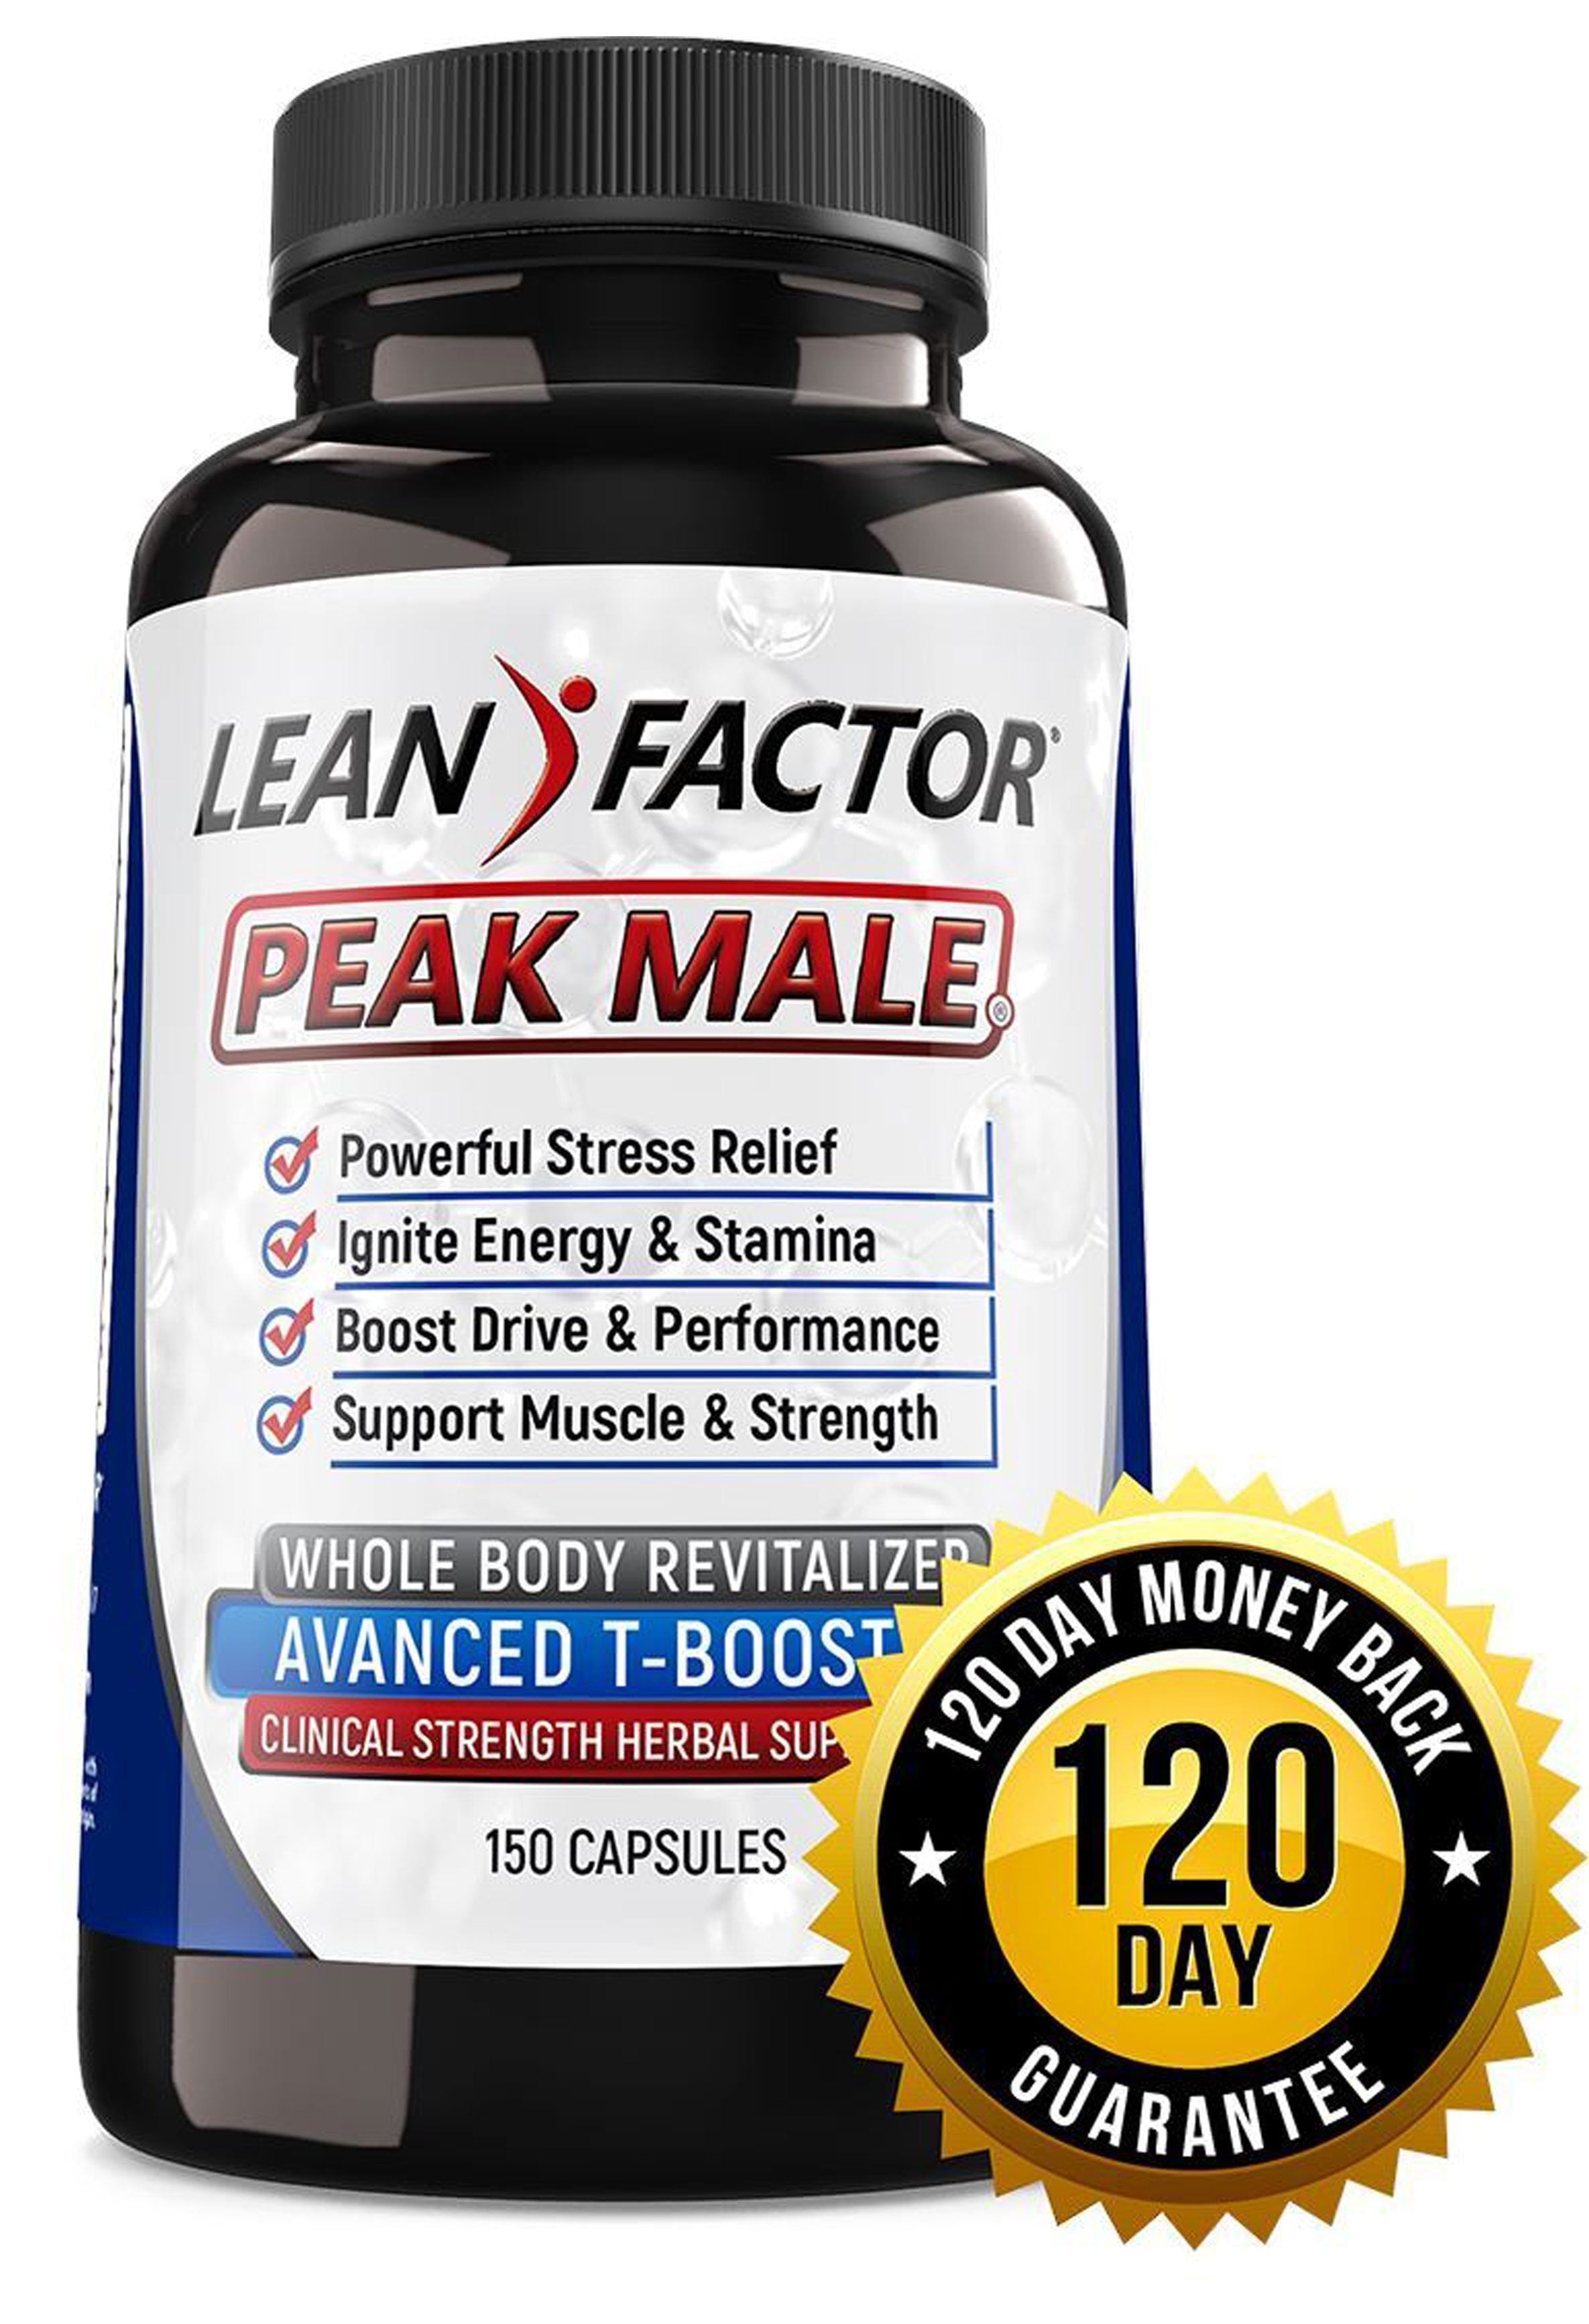 Peak Male by Lean Factor: Ultimate Natural T-Booster & Vitality Enhancer